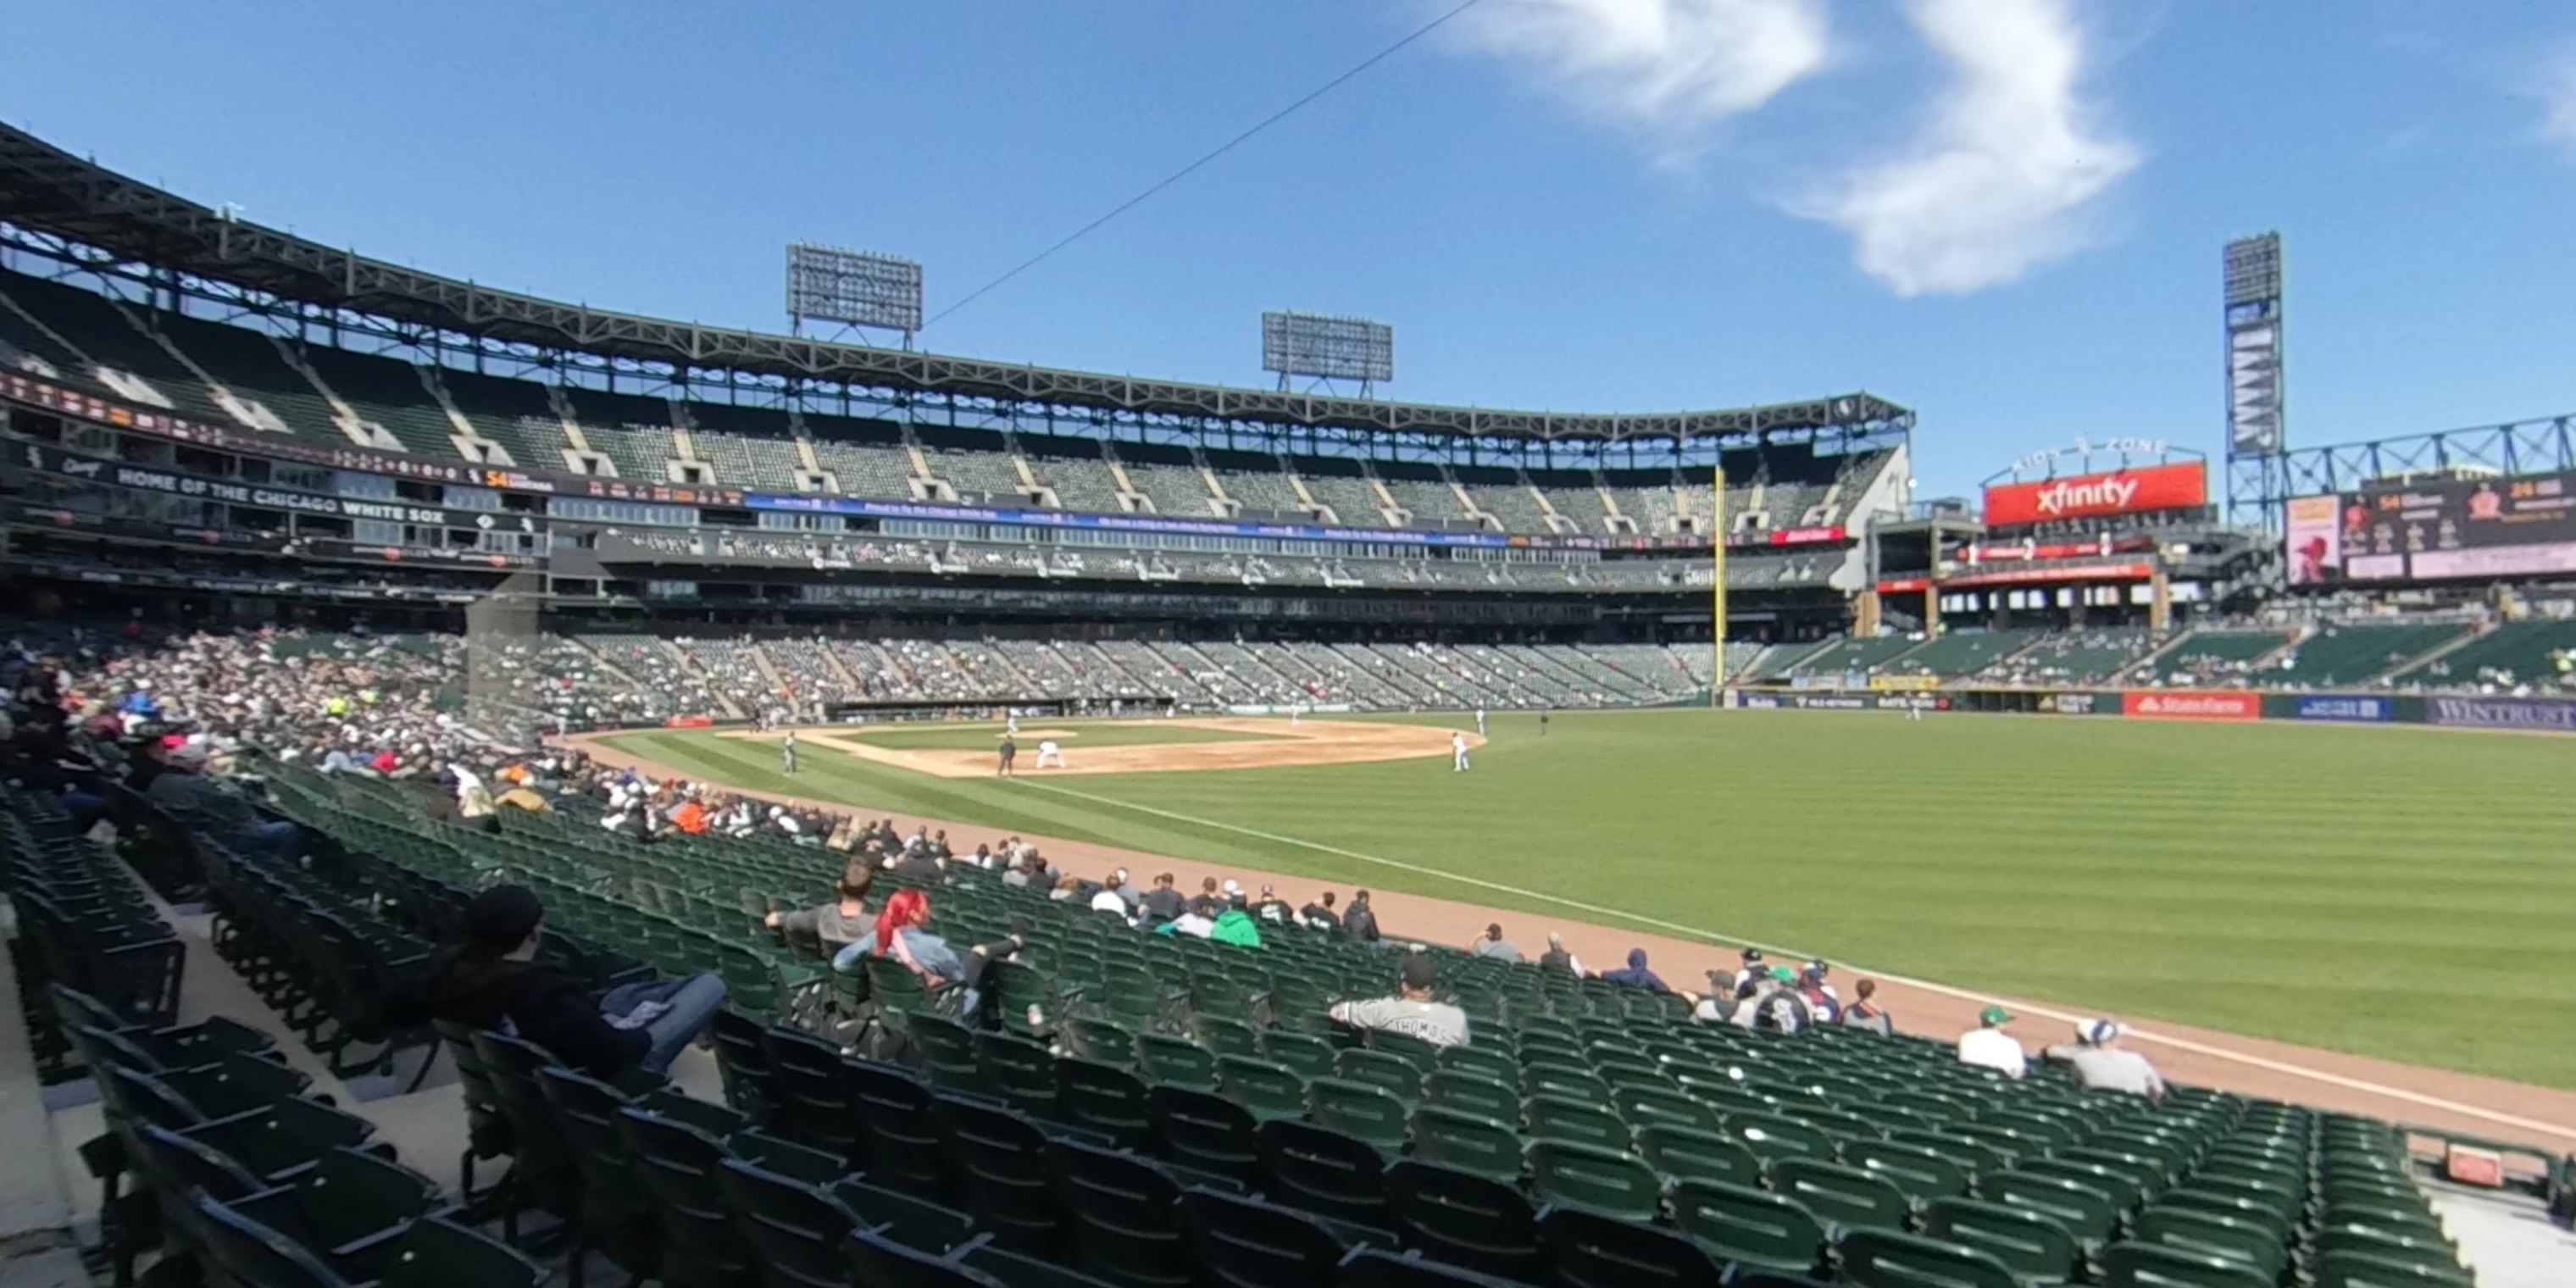 section 112 panoramic seat view  - guaranteed rate field